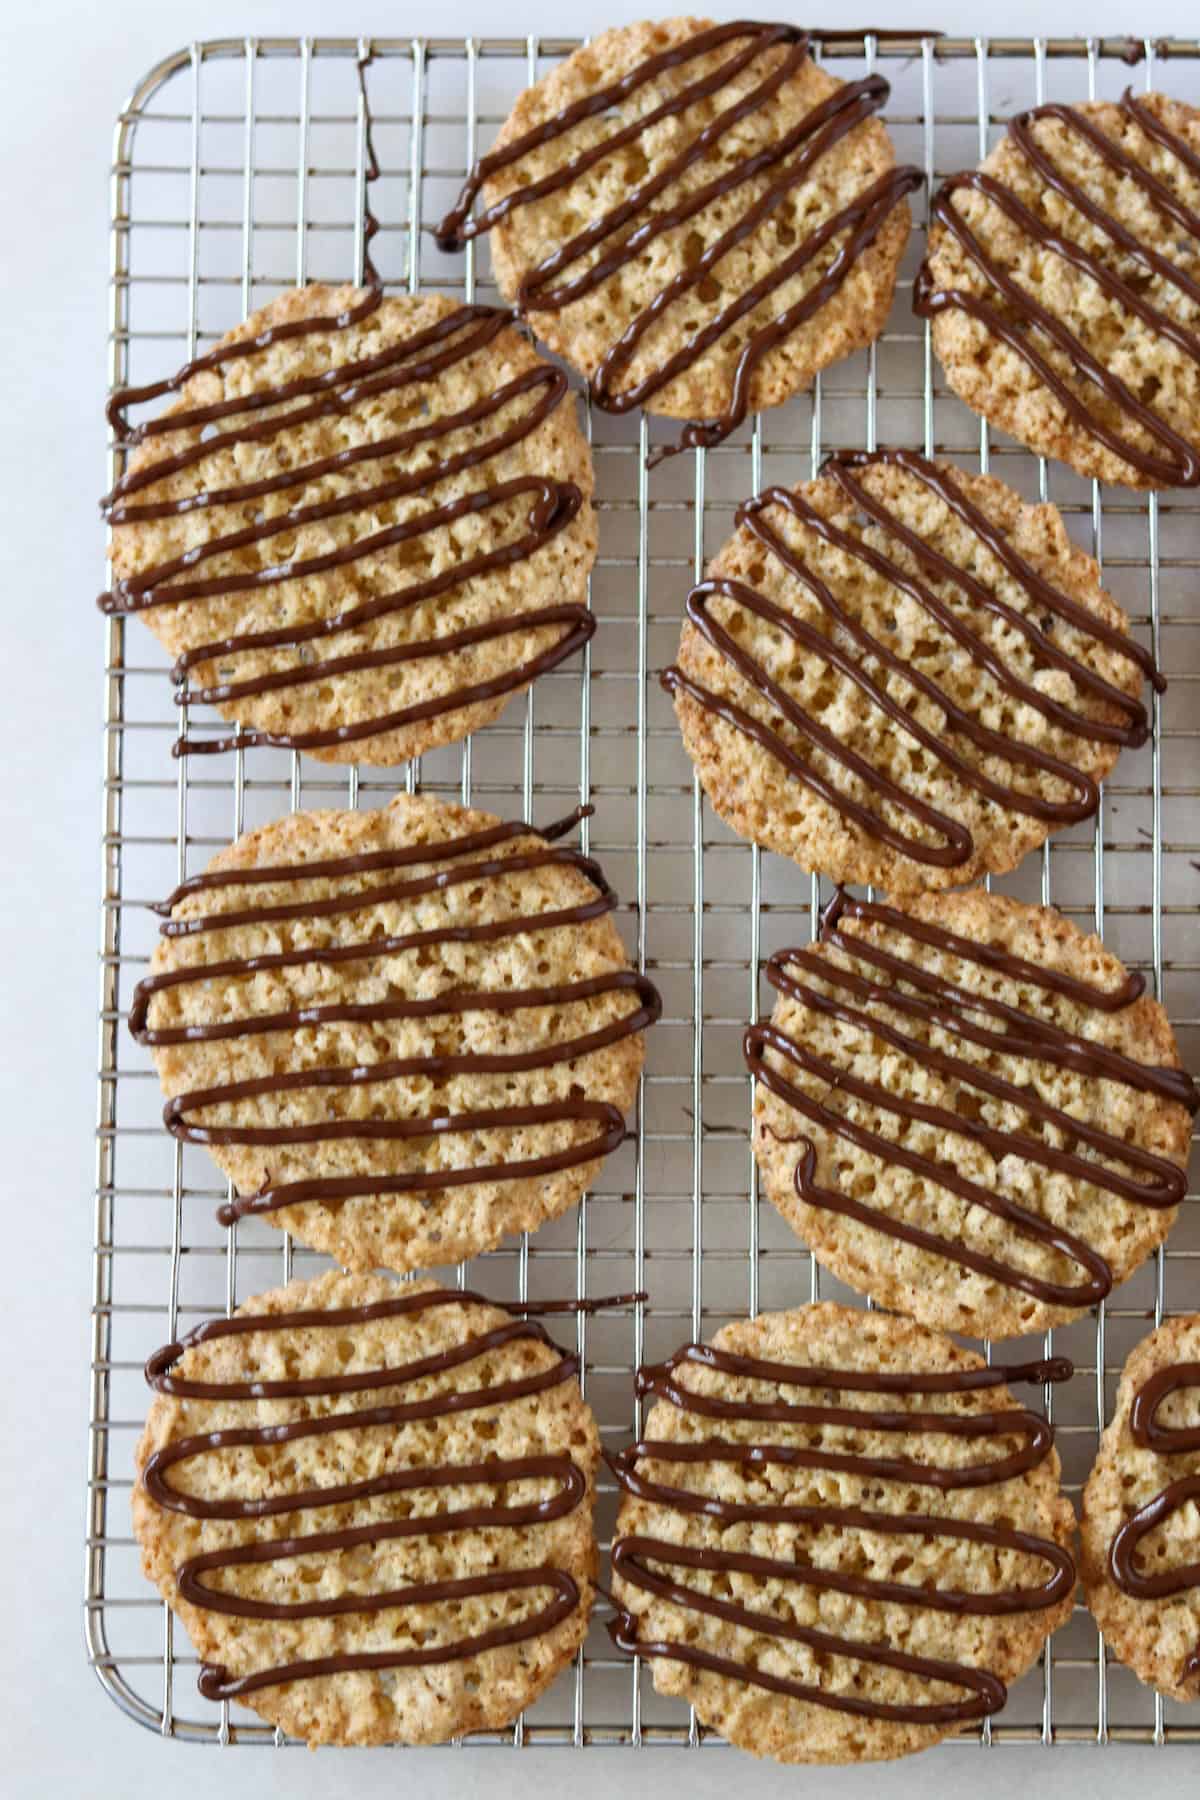 Swedish Oatmeal Cookies drizzled with chocolate.